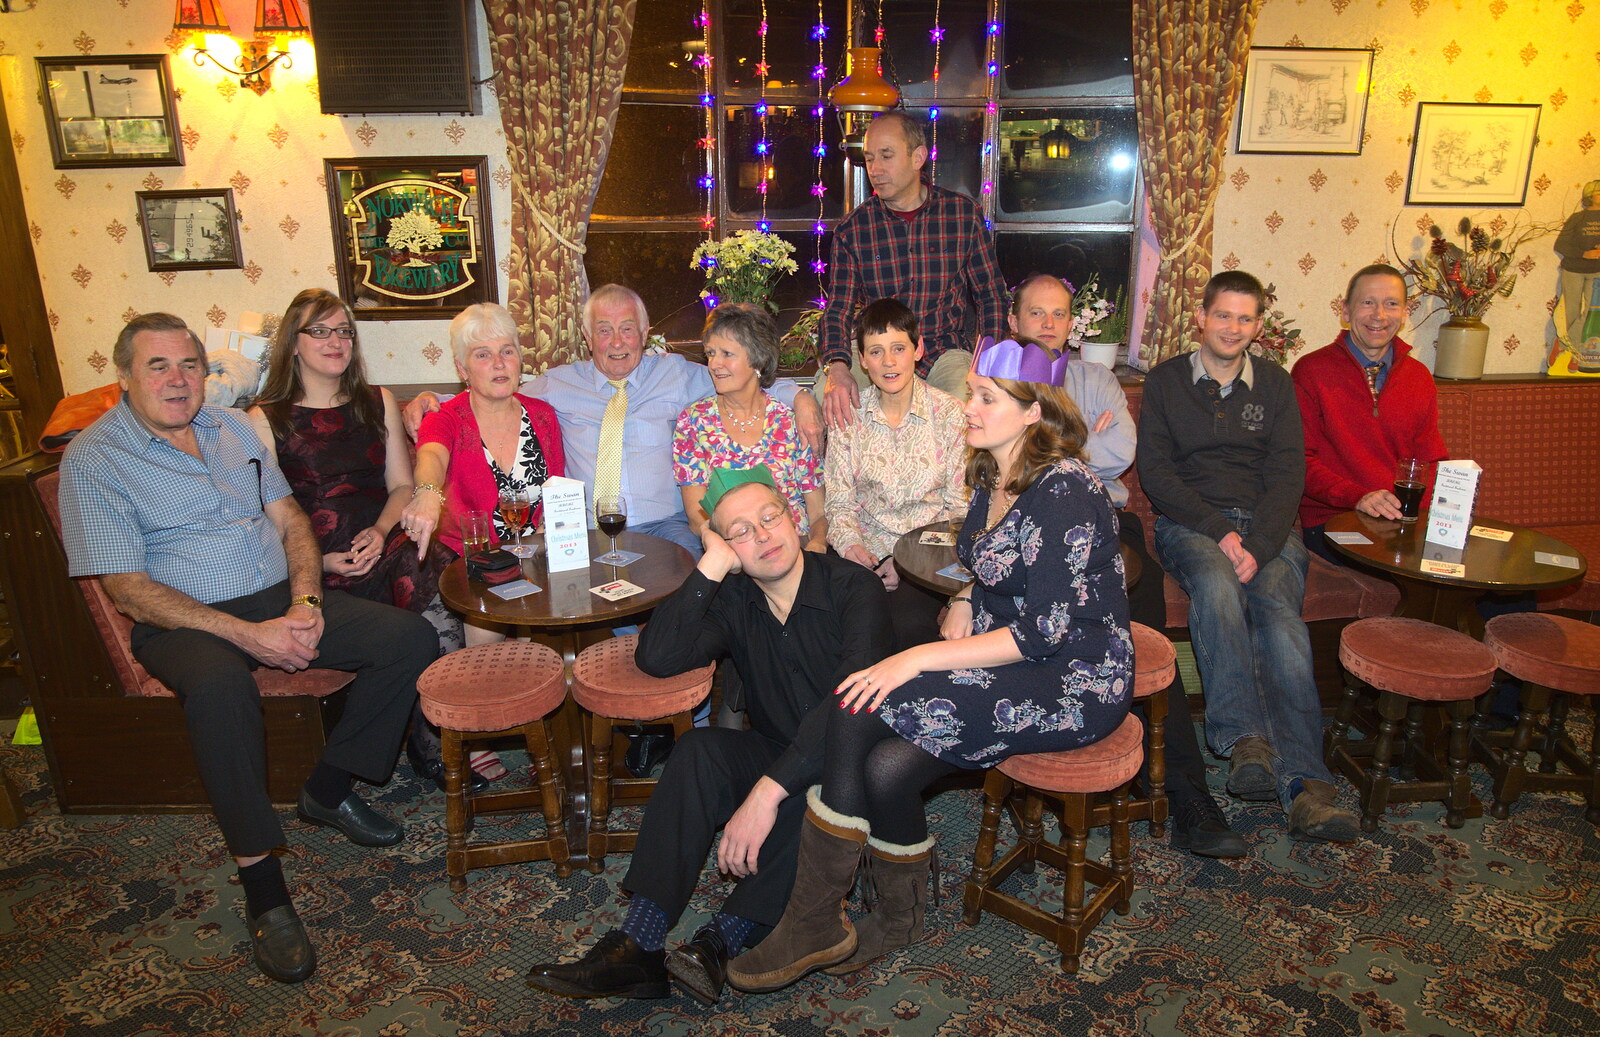 A group photo from The BSCC Christmas Dinner, Brome, Suffolk - 7th December 2013